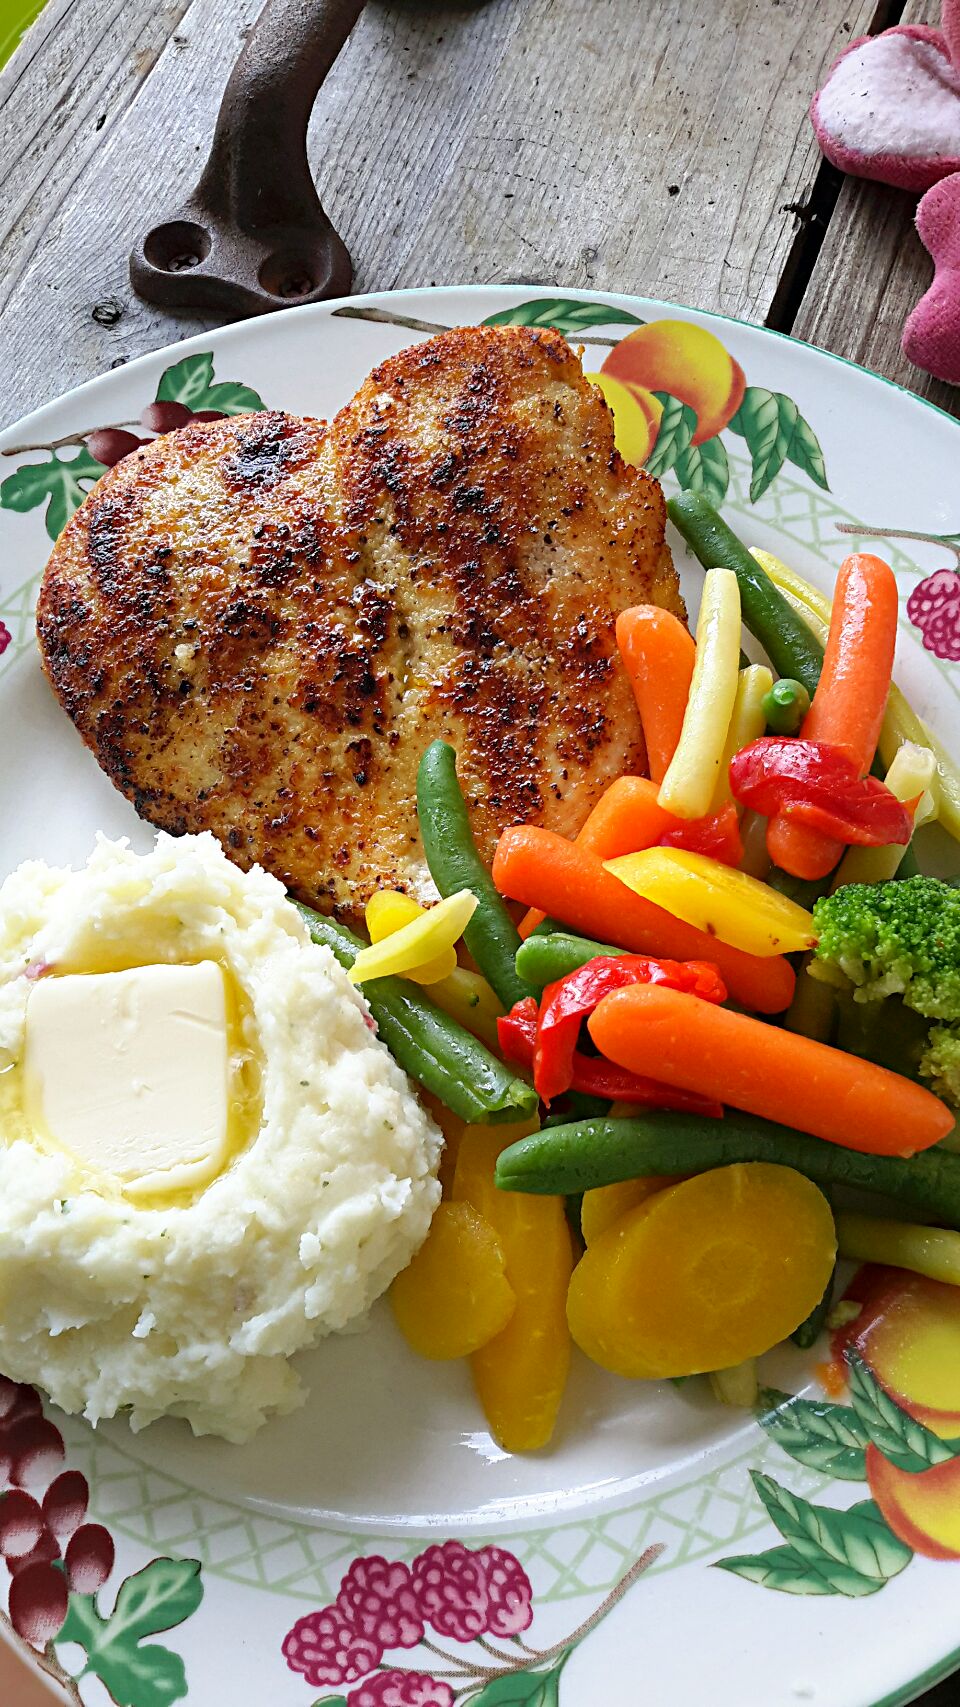 Pan seared chicken breast, garlic mashed potatoes, and heirloom veggies tossed in butter and lemon...